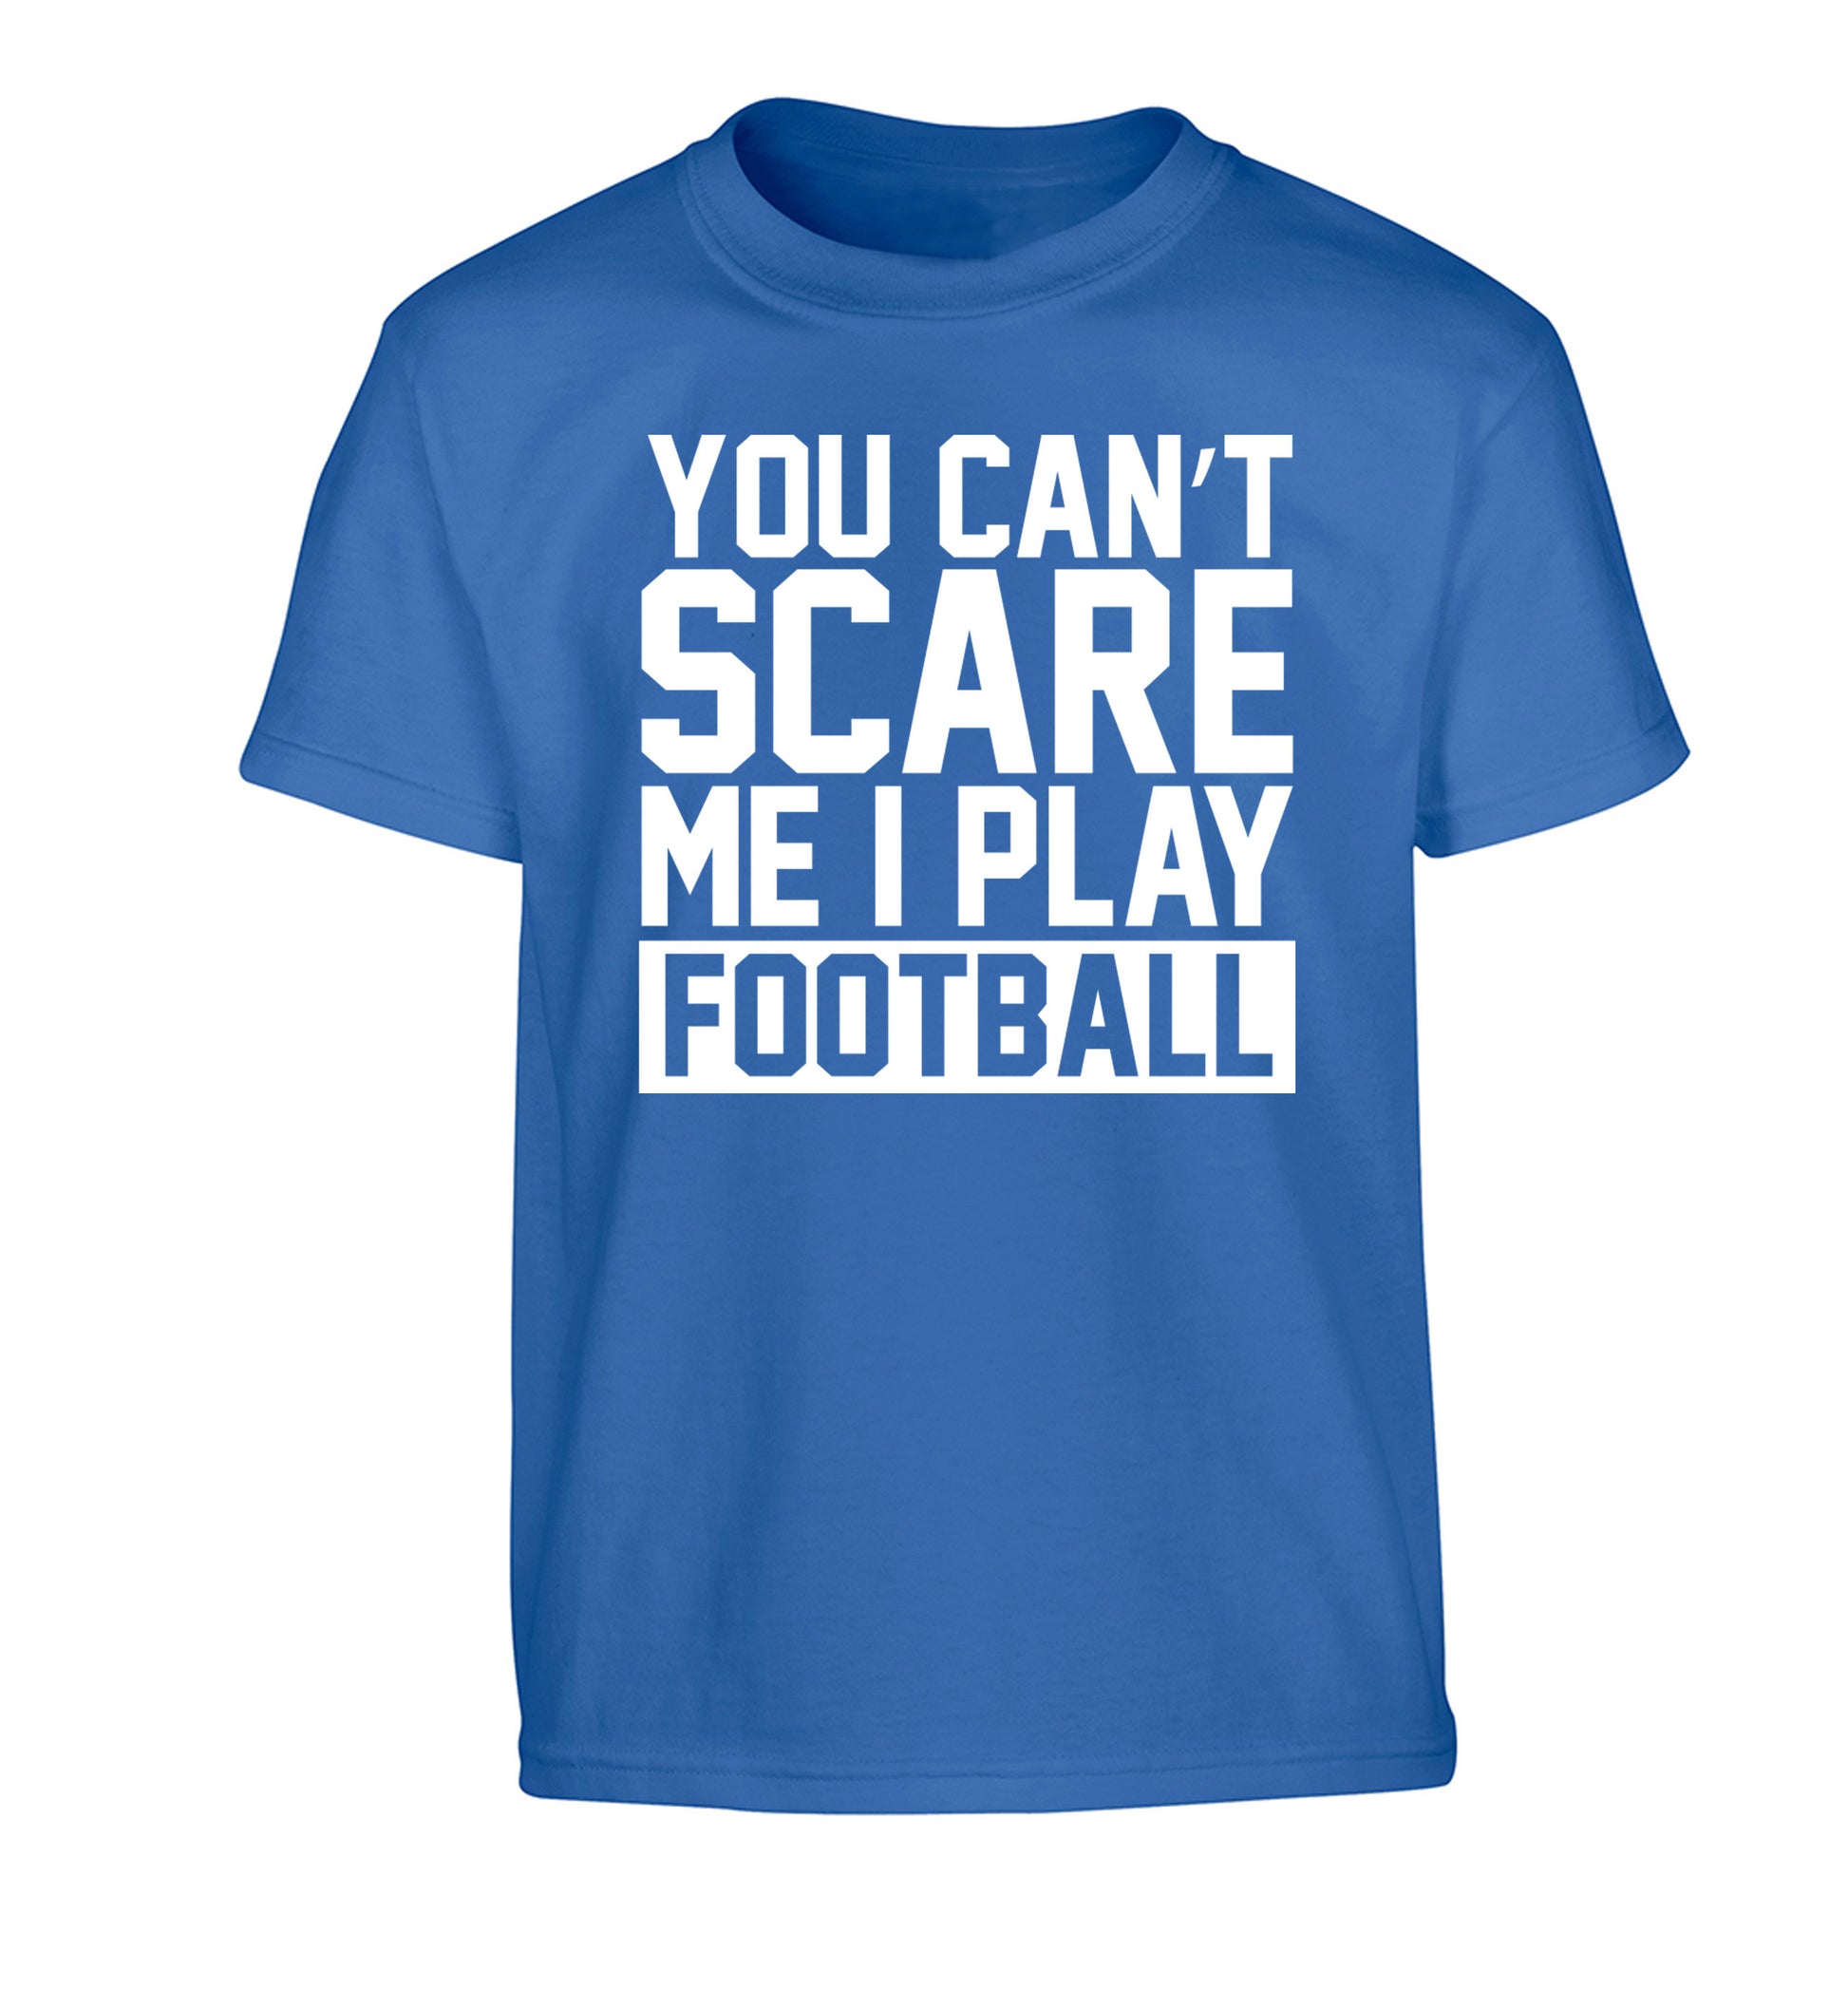 You can't scare me I play football Children's blue Tshirt 12-14 Years